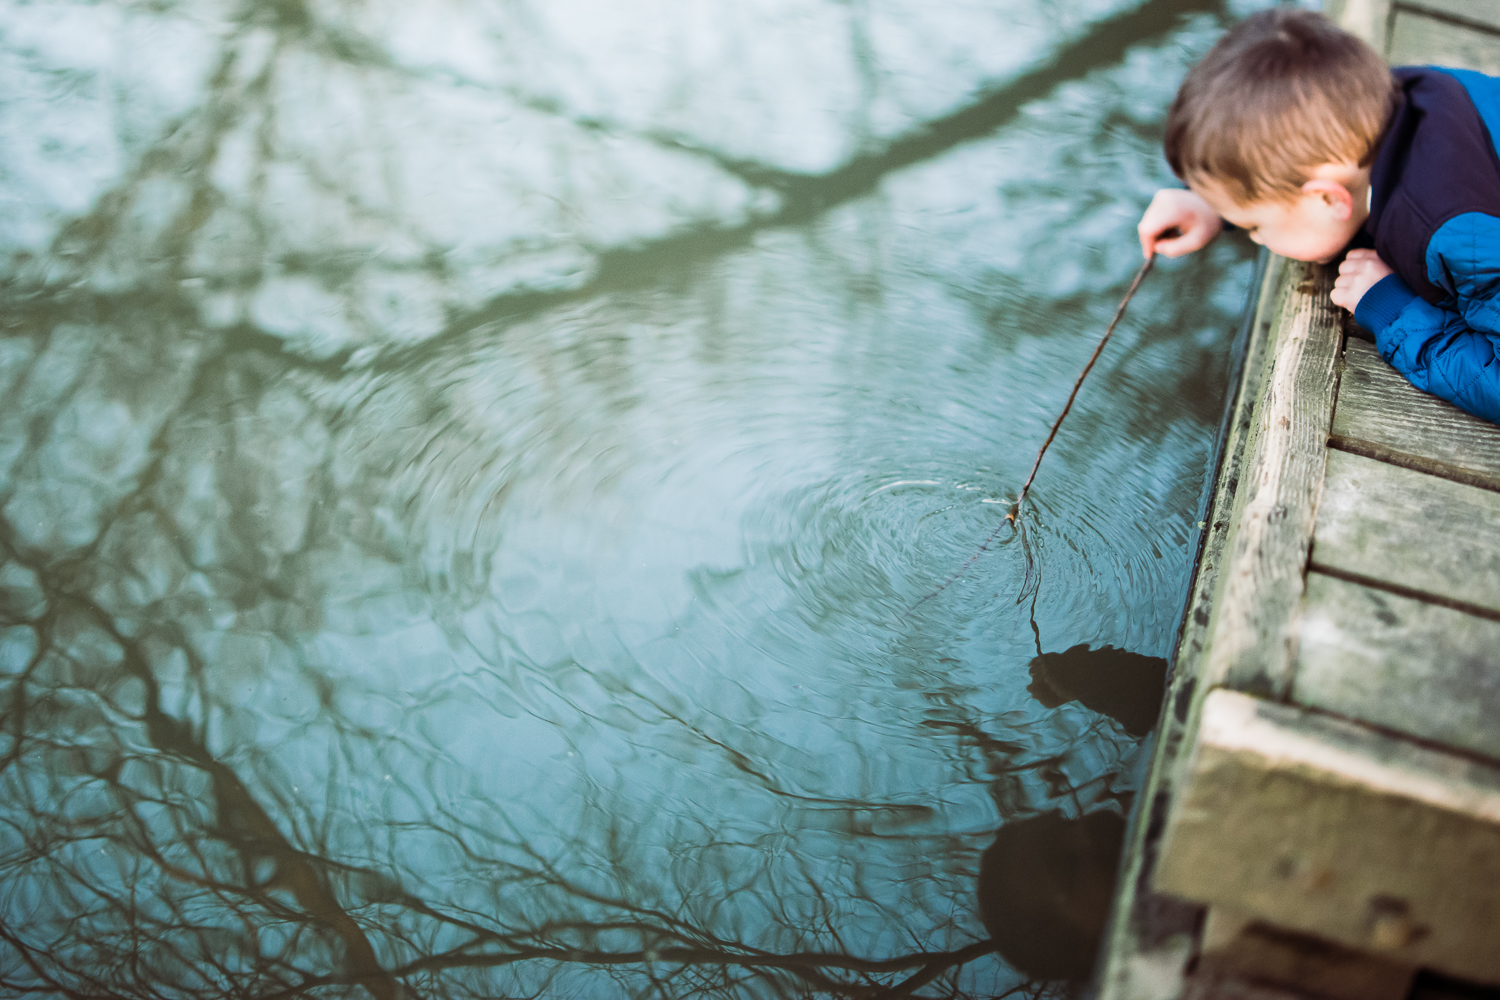 Boy dipping a stick into the water creating ripples